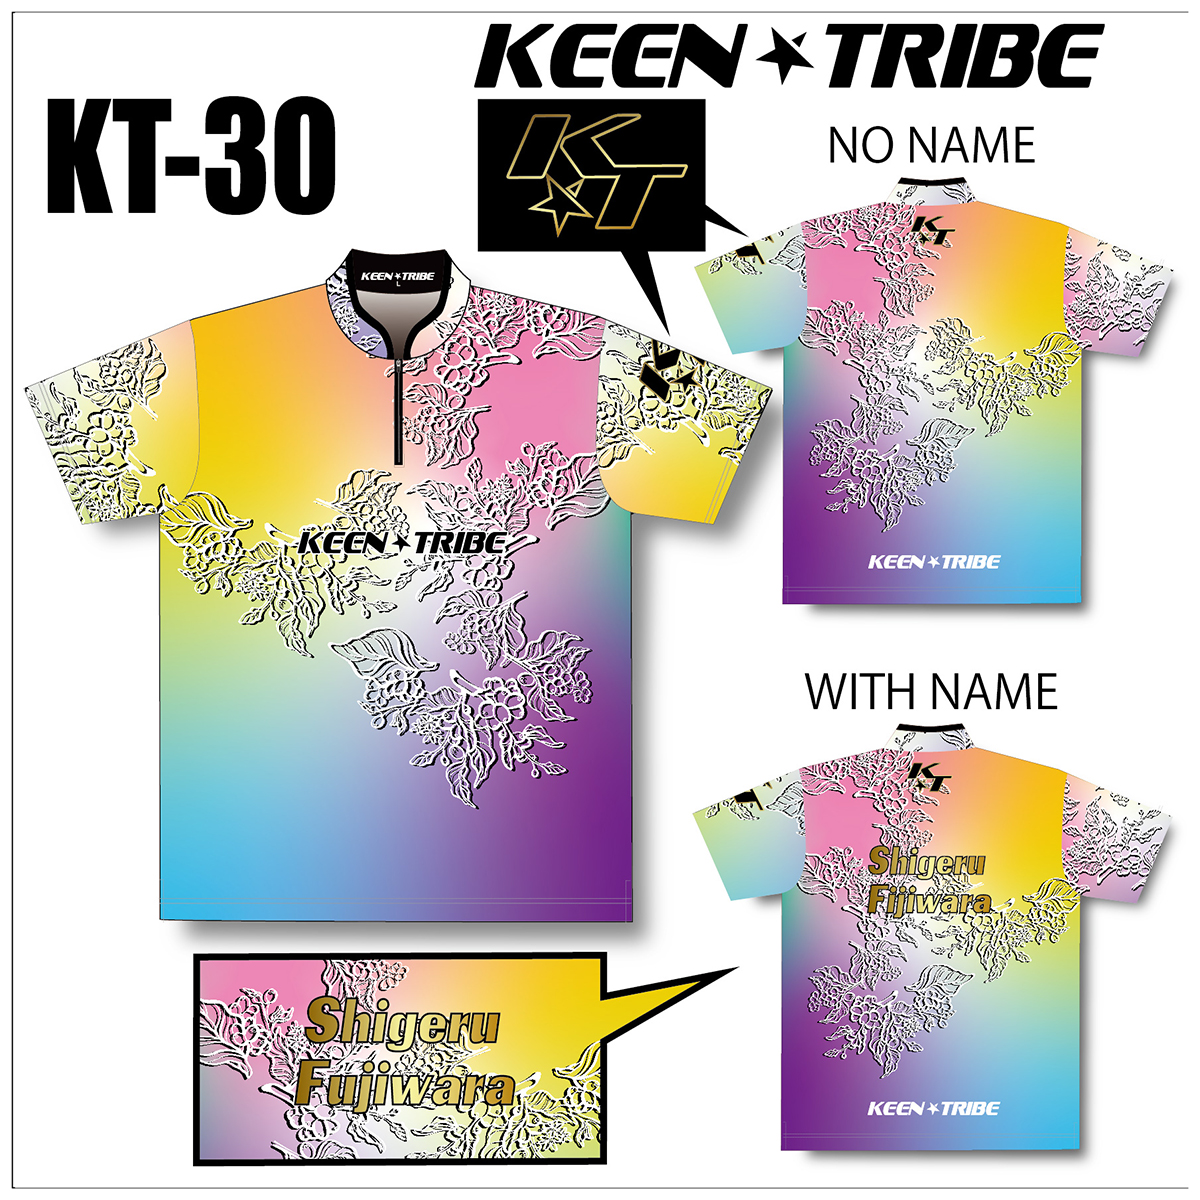 KEEN ★ TRIBE　KT-30(受注生産)